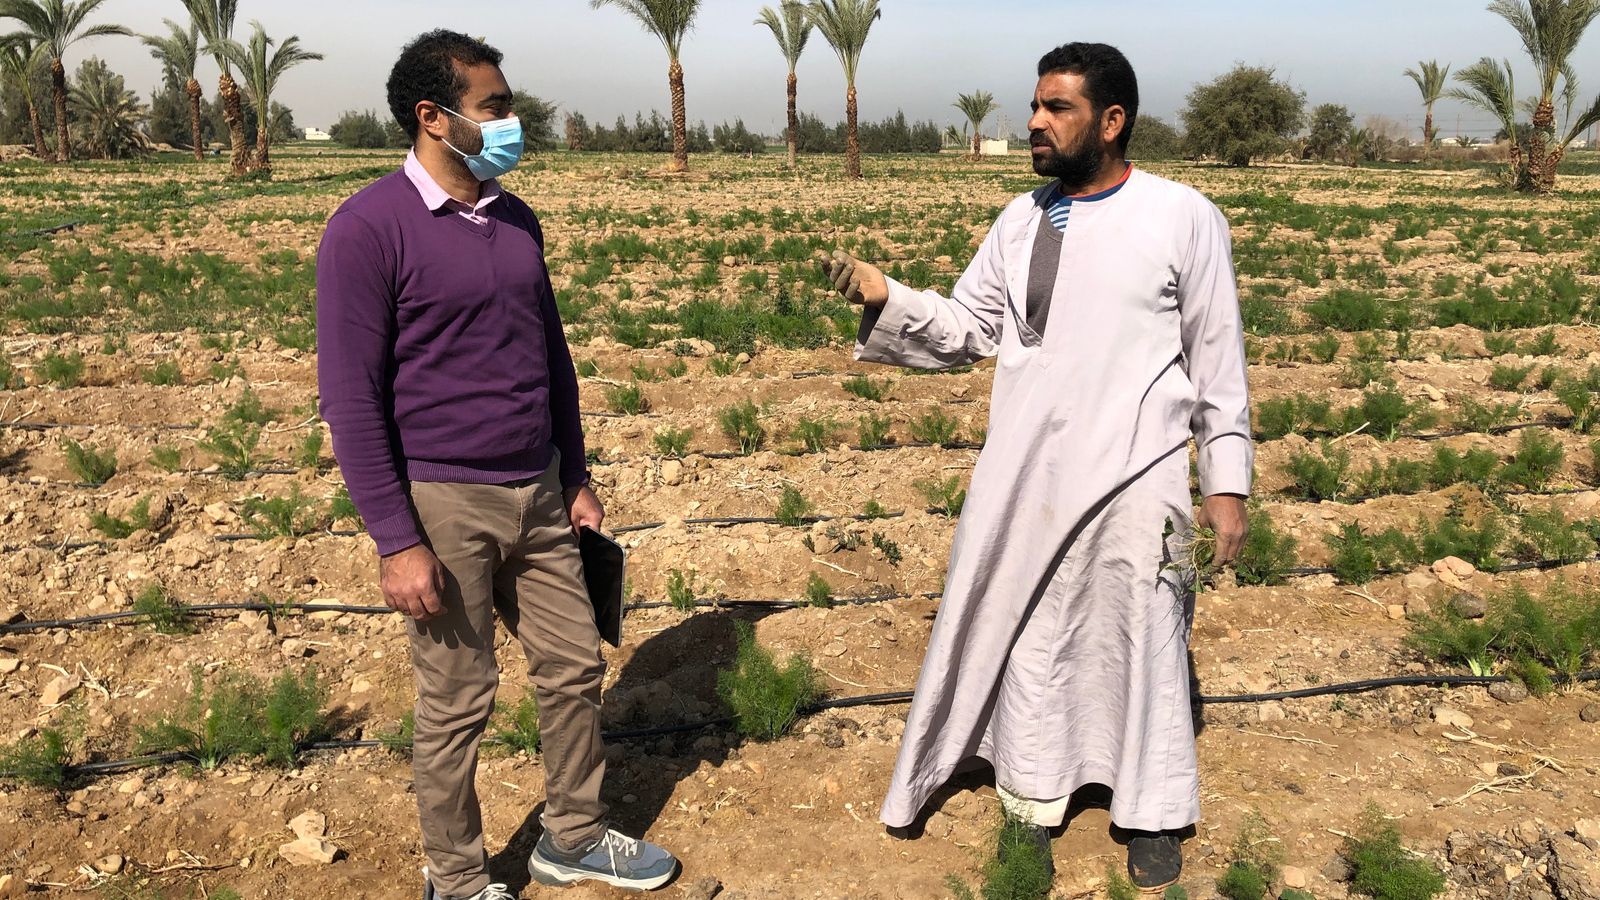 Two men talk while standing in a field of medicinal plants in Egypt.